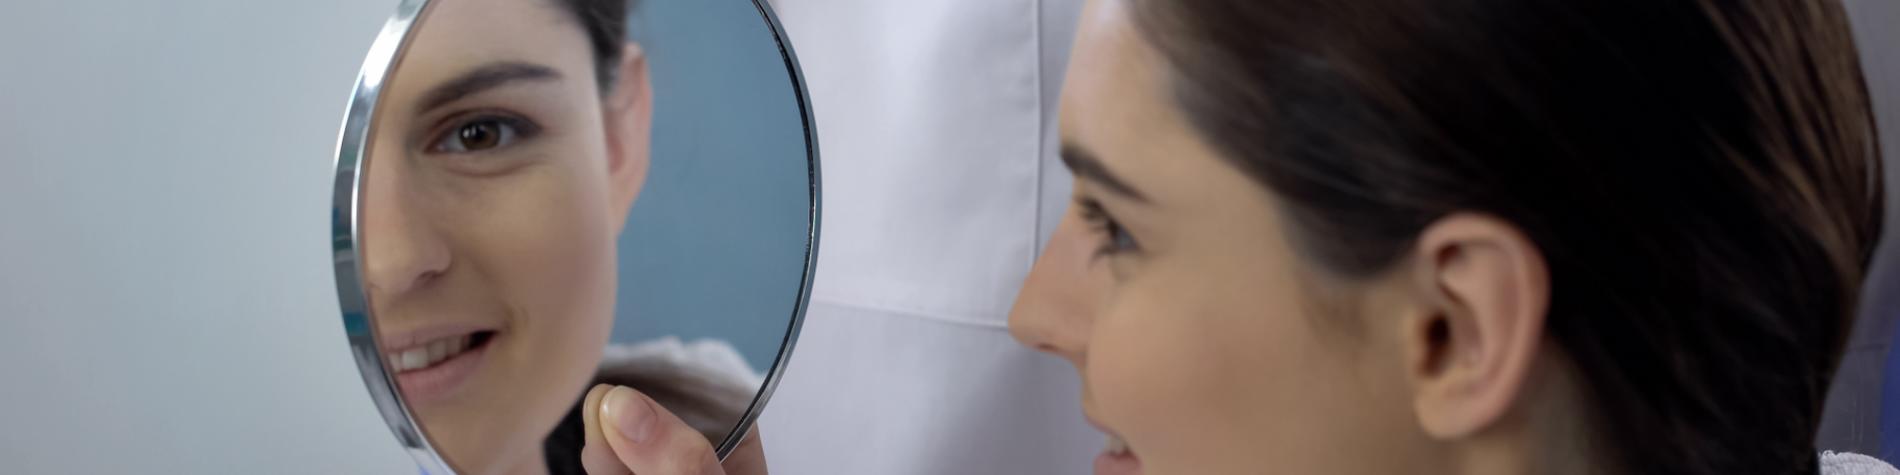 Woman looking in the mirror after undergoing rhinoplasty surgery.